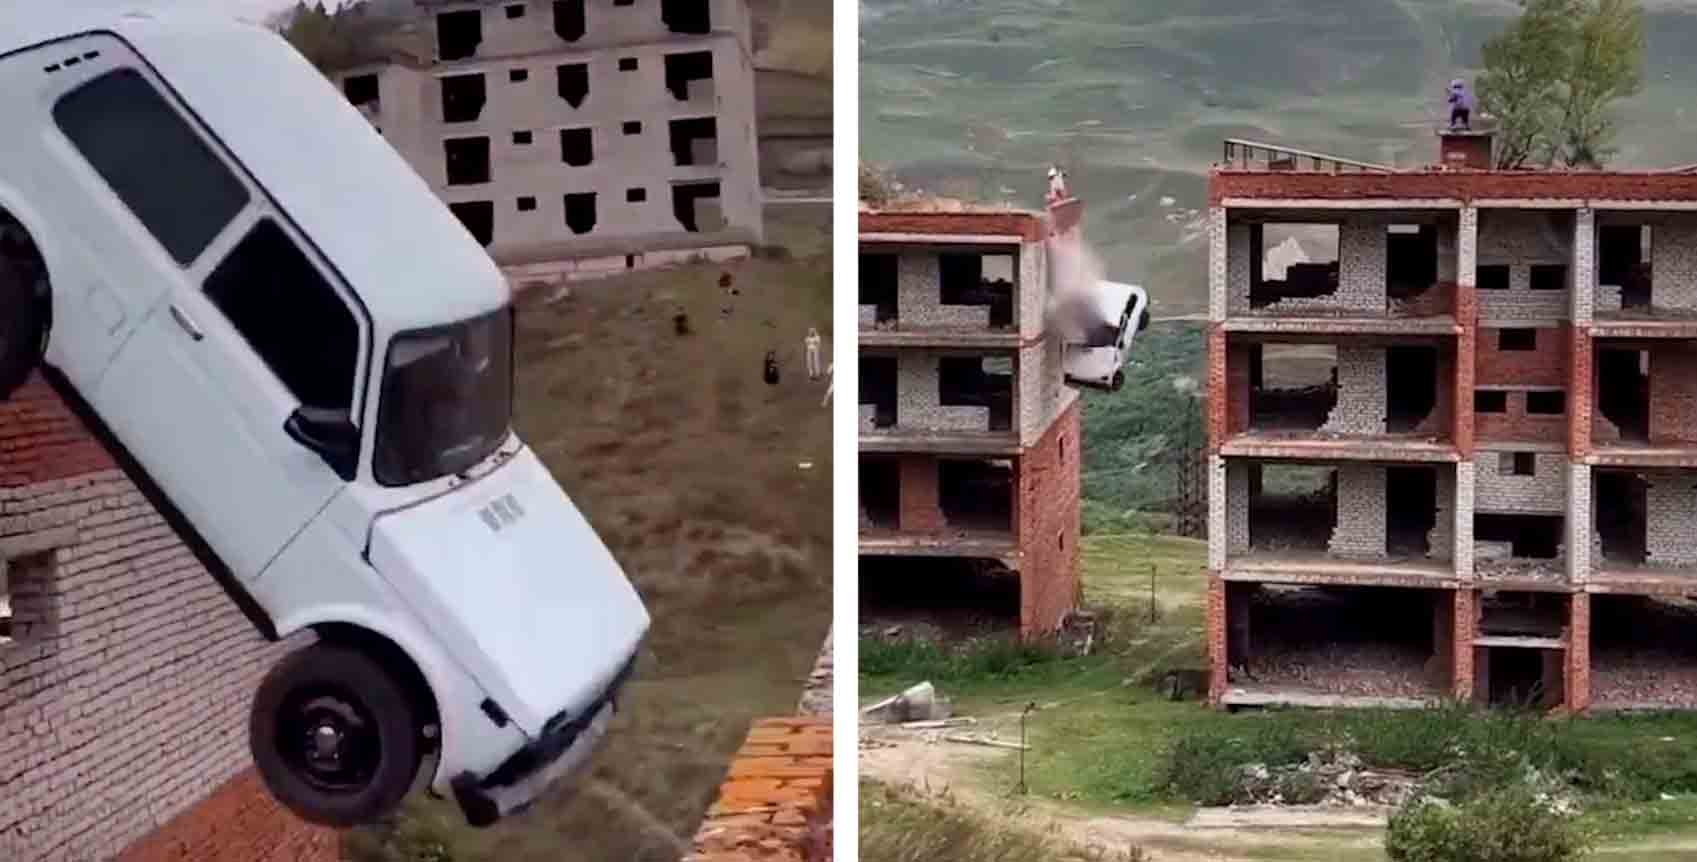 Video: Russian falls more than 15 meters trying to drive from one building to another